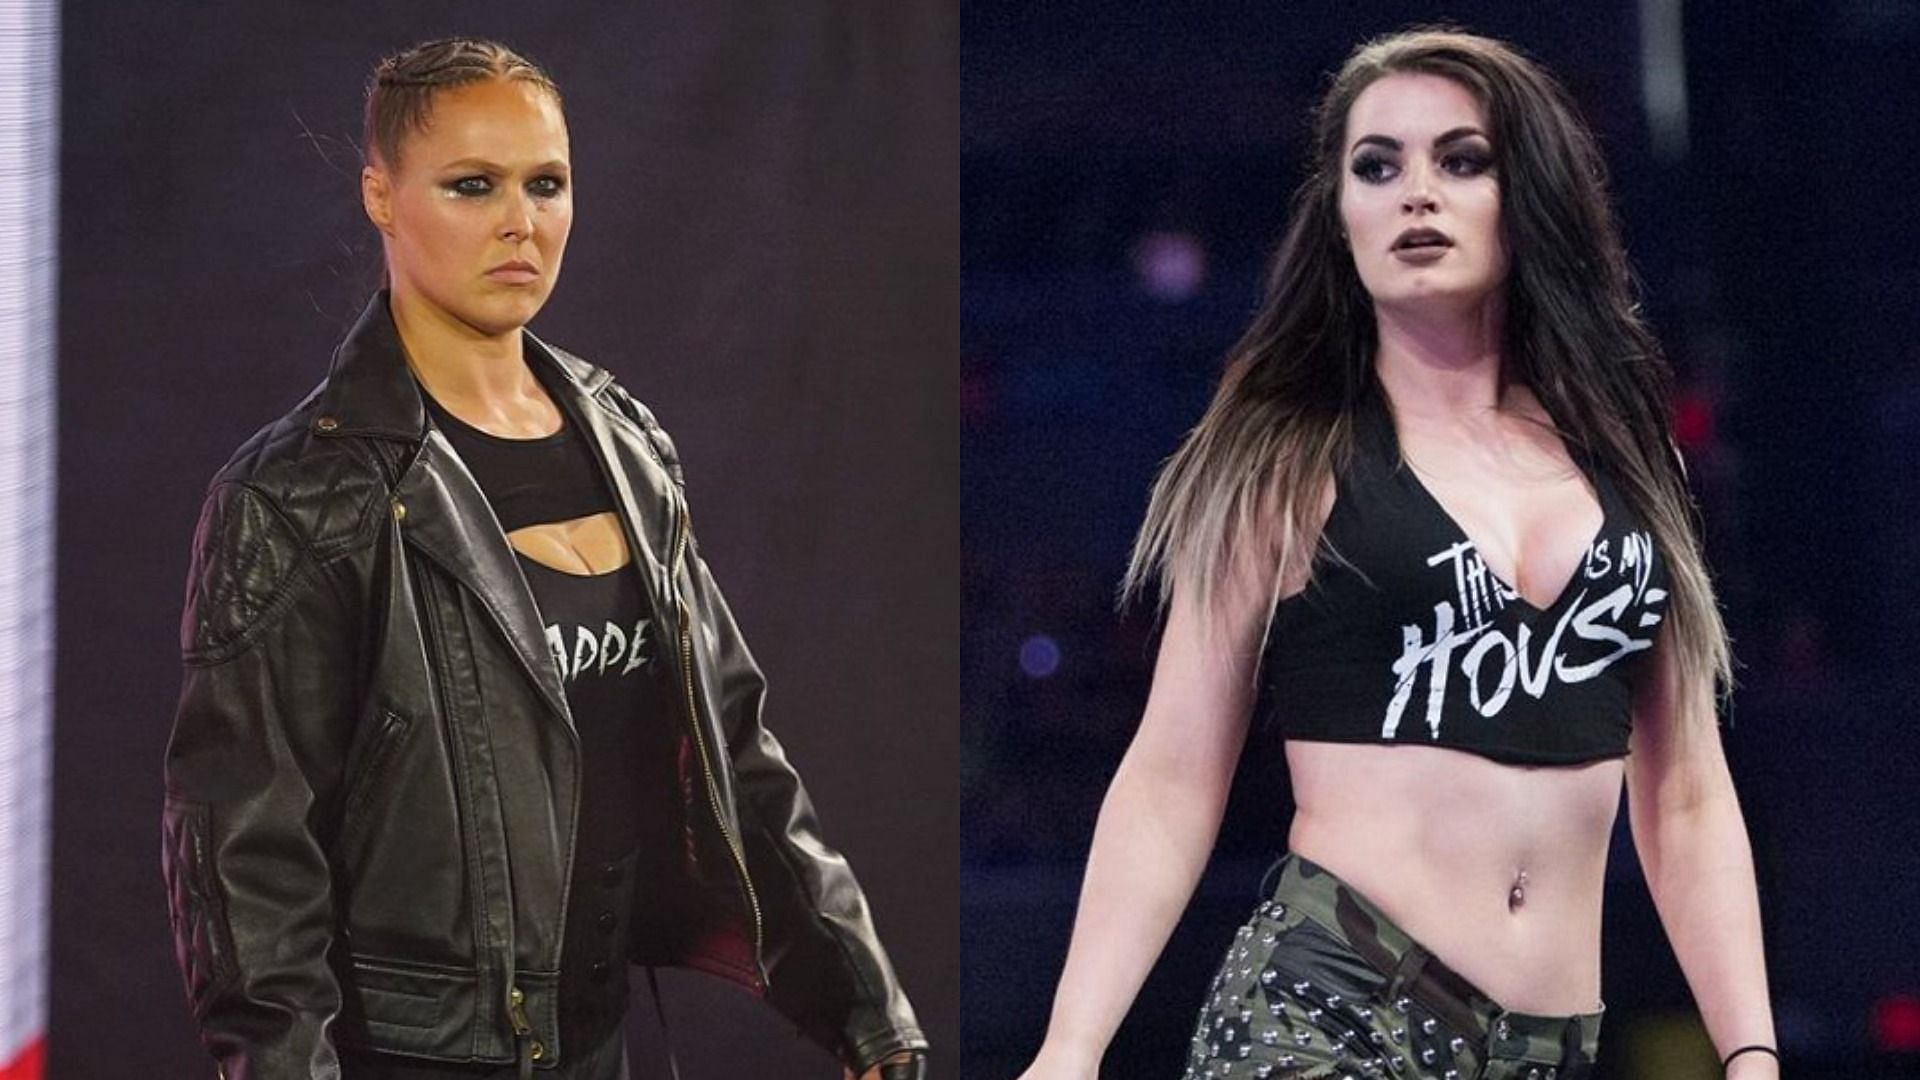 Ronda Rousey (left); Paige (right)